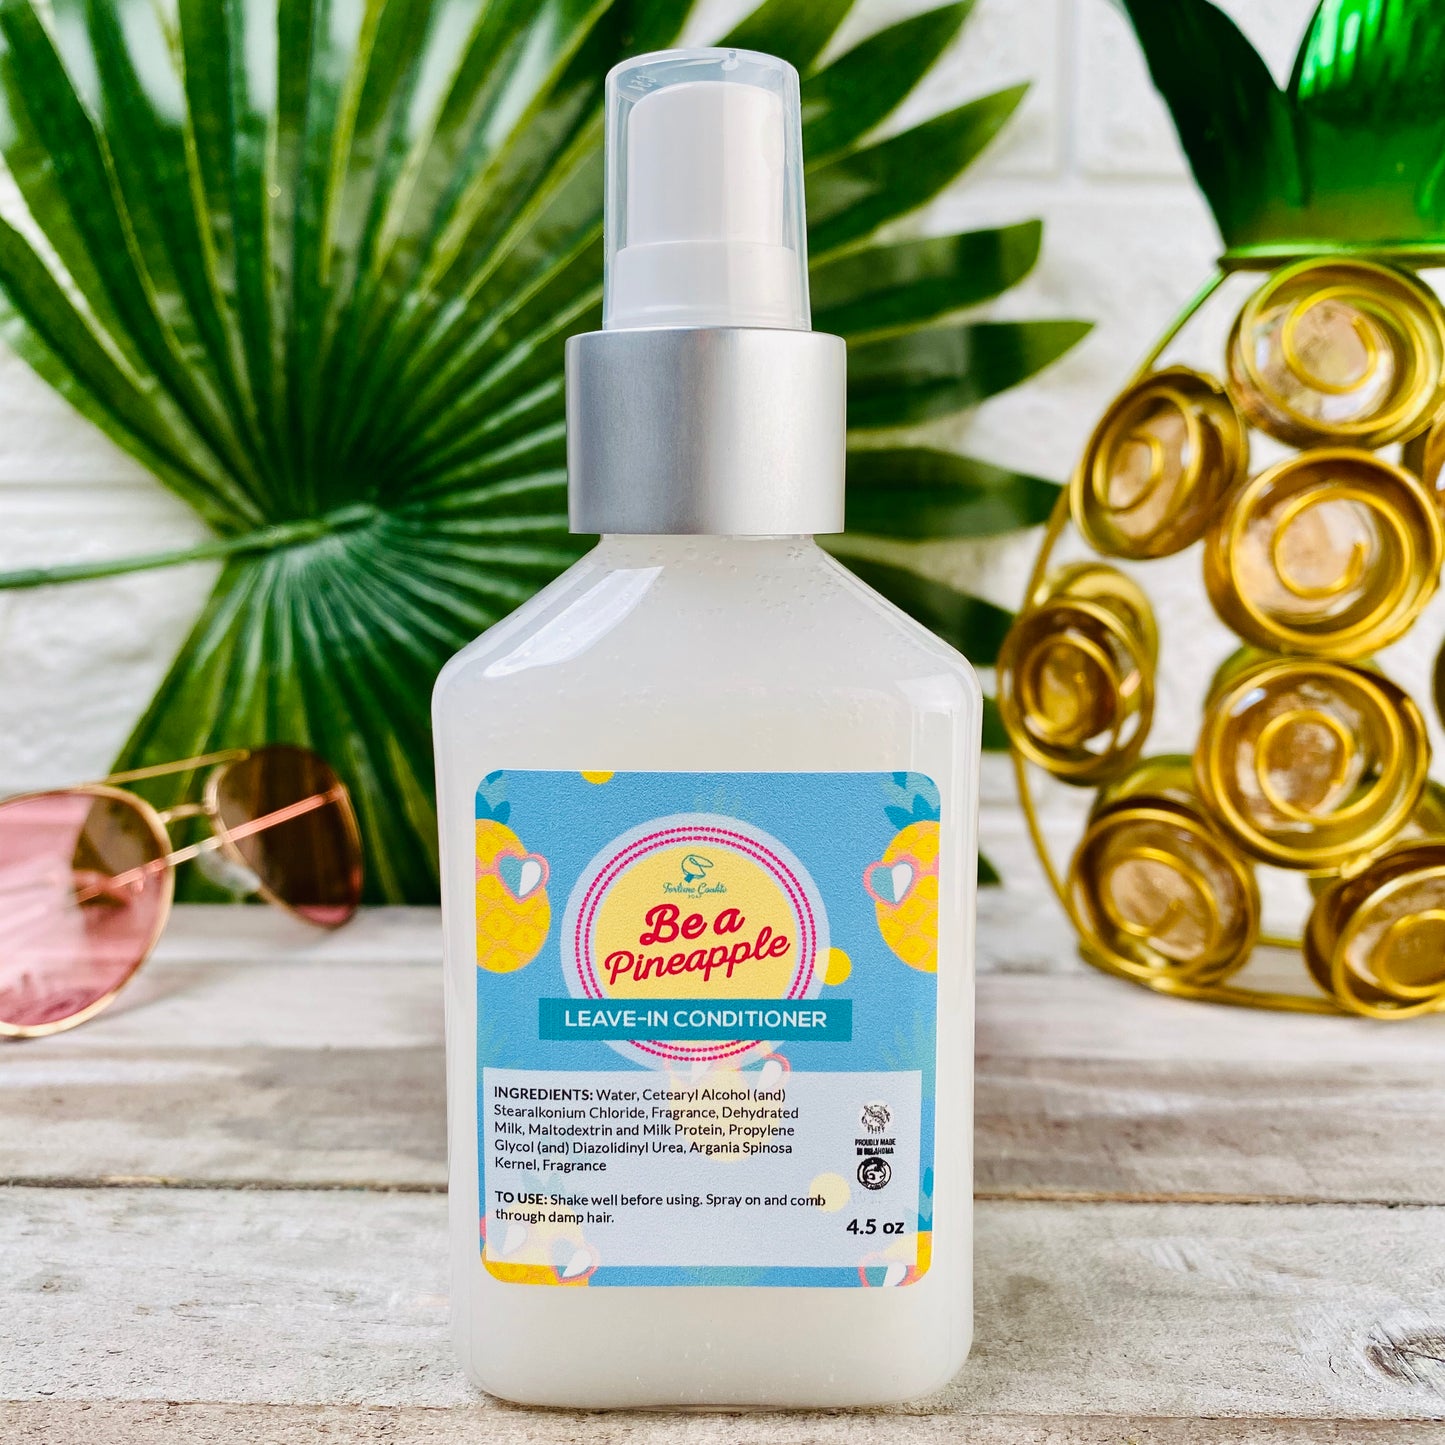 BE A PINEAPPLE Leave-In Conditioner